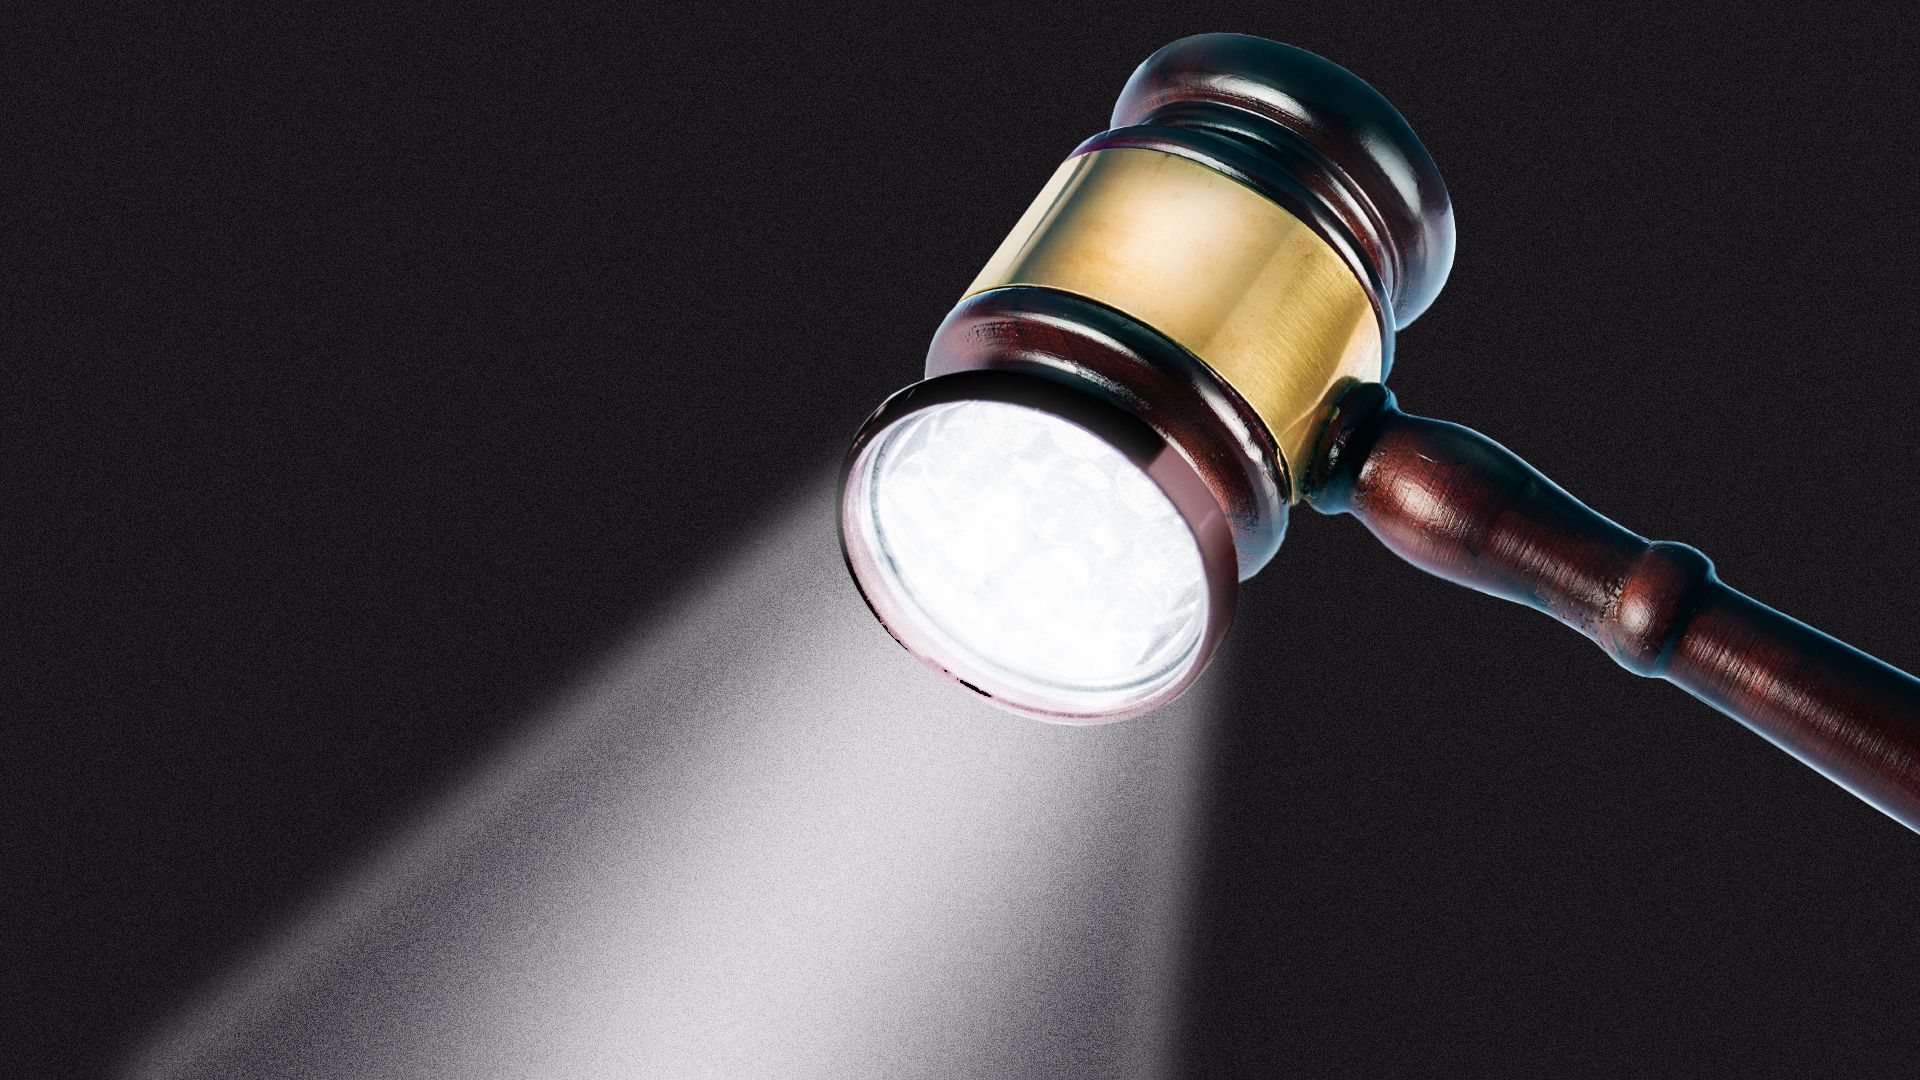 Illustration of a gavel with a flashlight head on one end shining light 